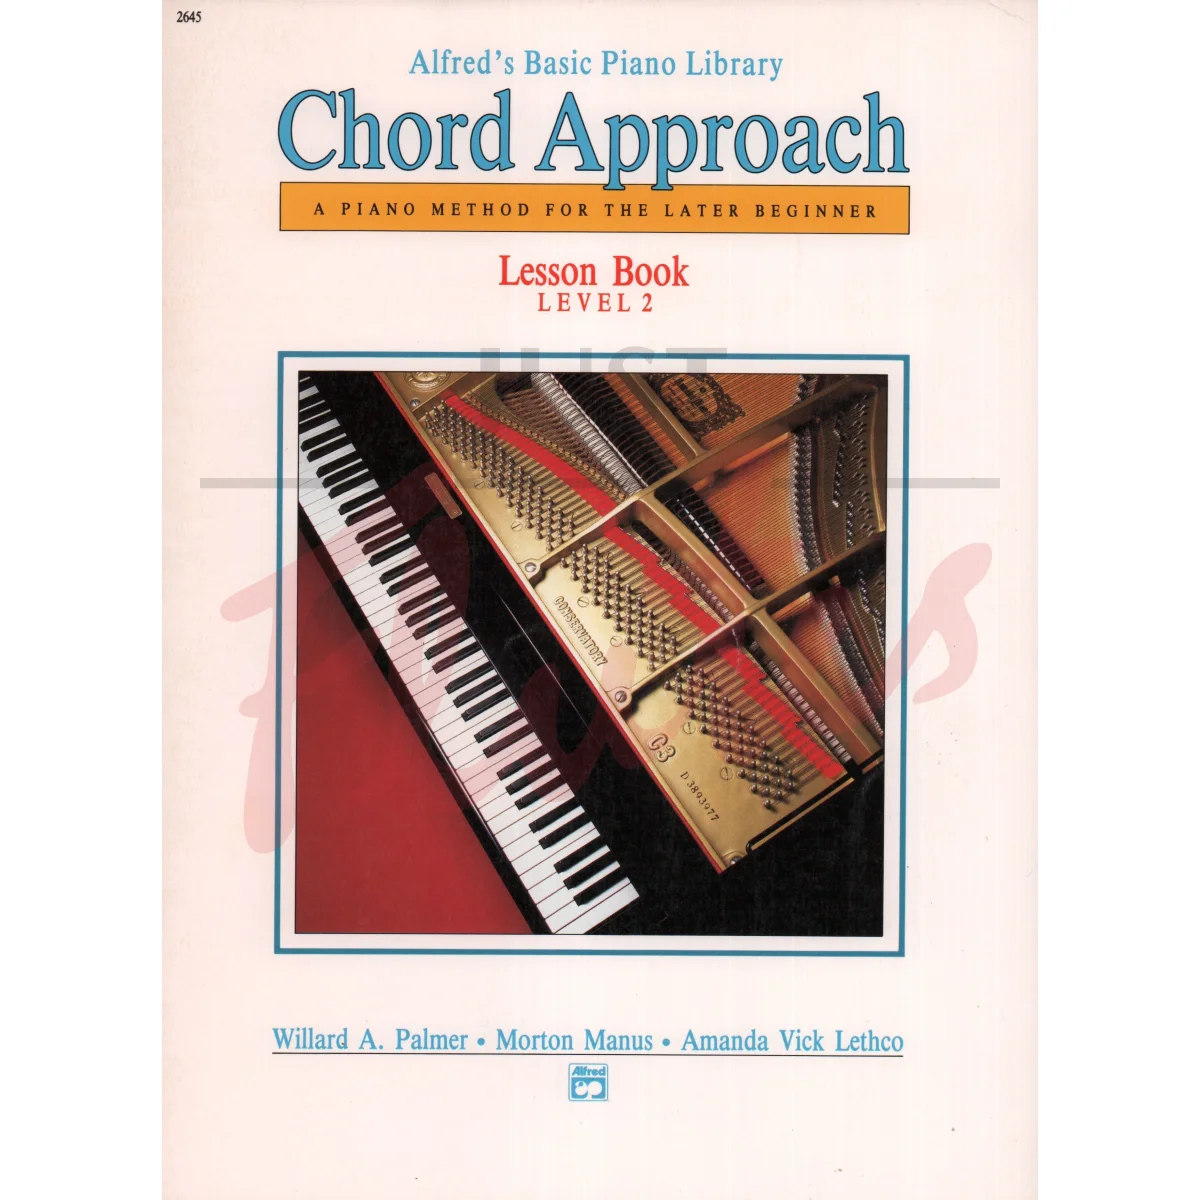 Chord Approach Lesson Book Level 2